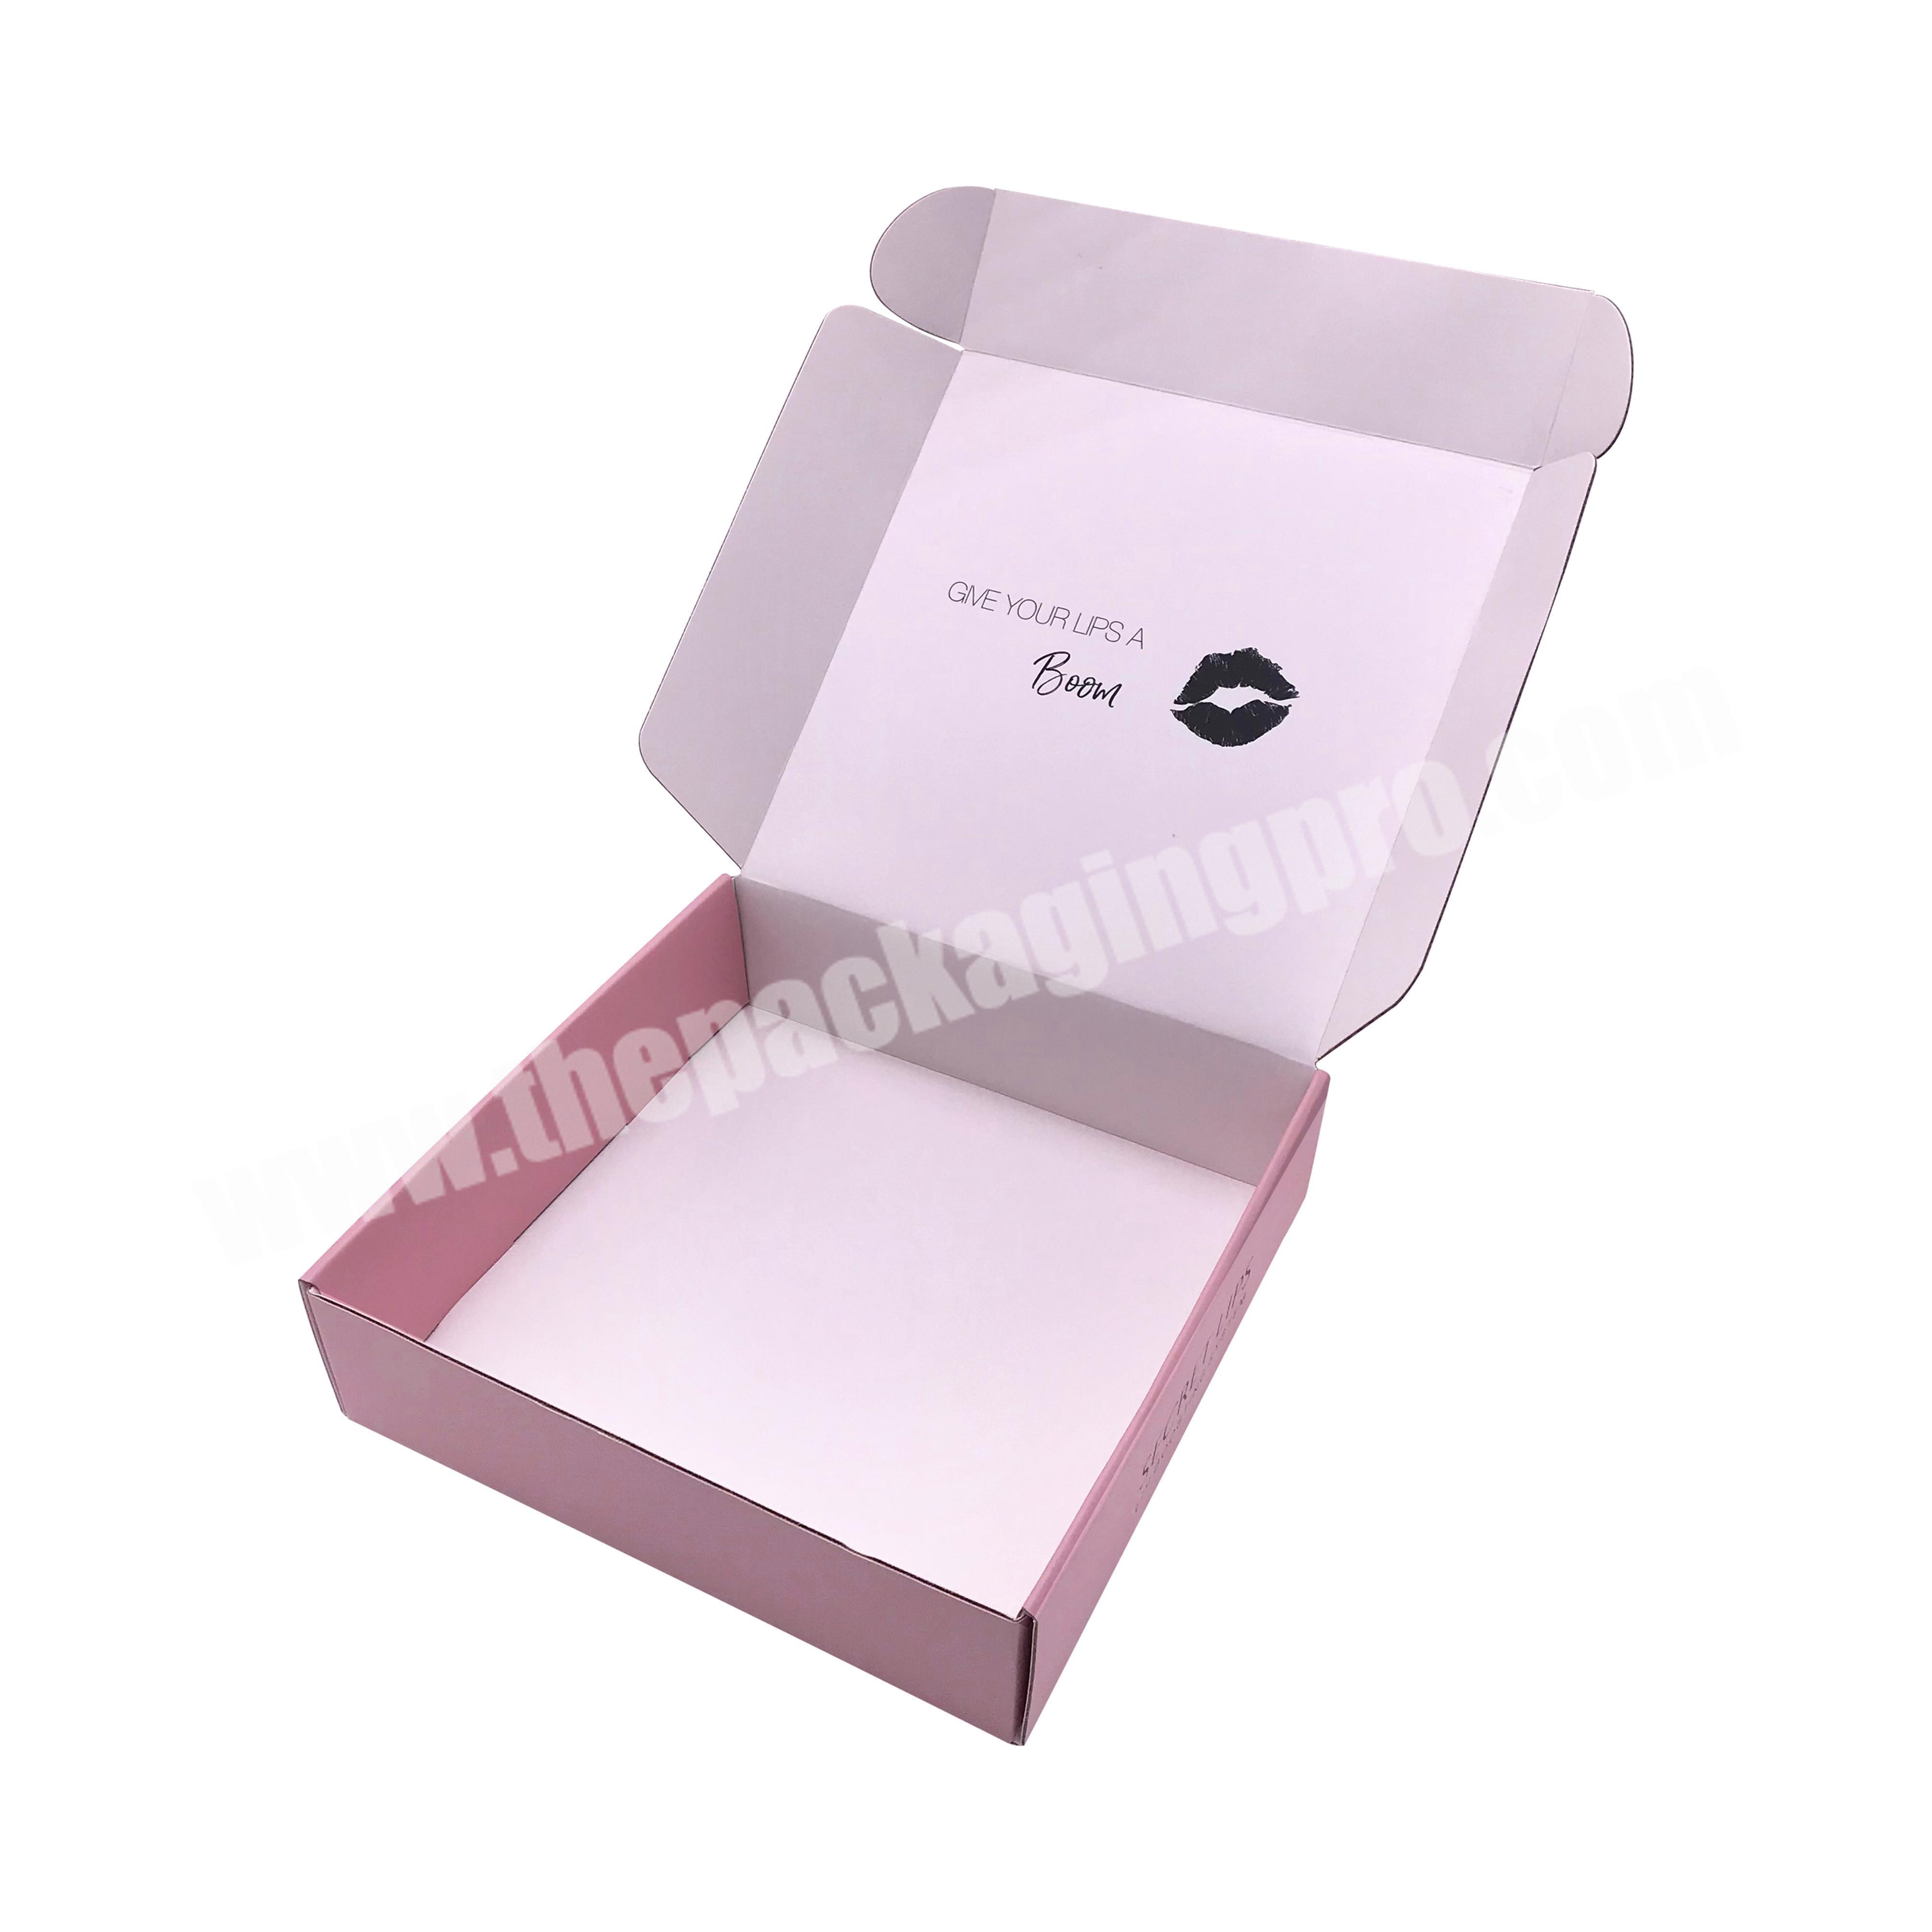 Hot new products milk carton packaging luxury folding box lingerie